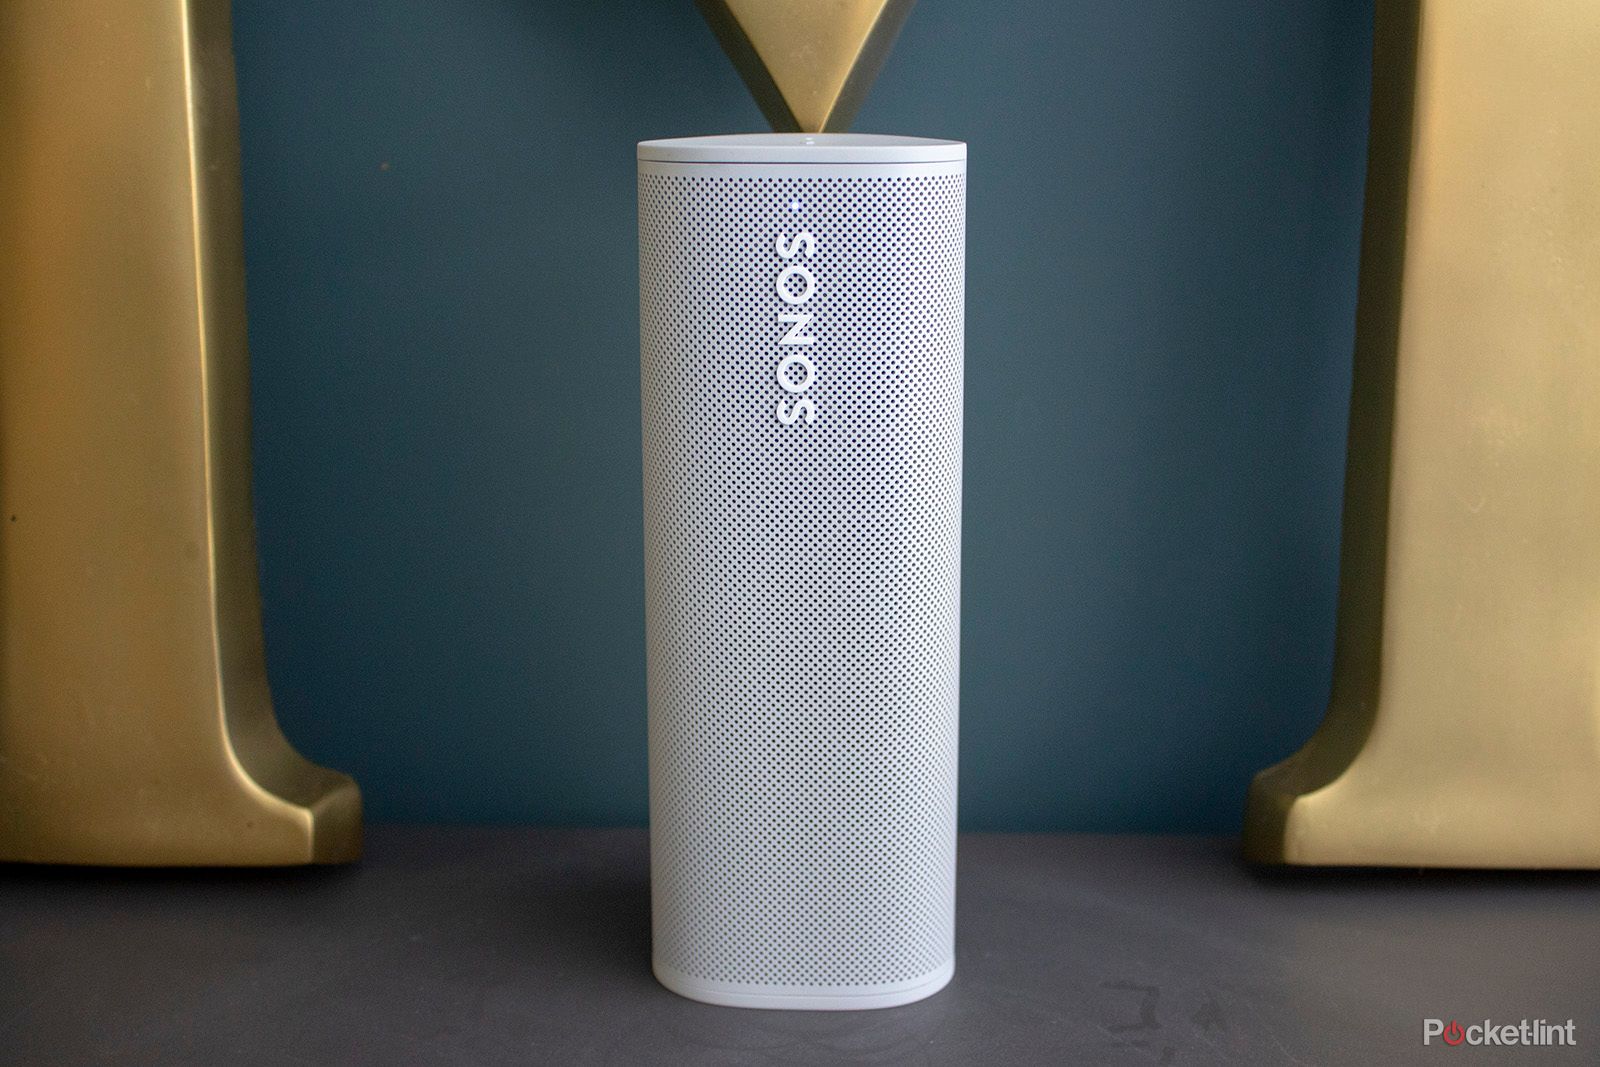 Sonos just brought Alexa voice control to 27 more countries